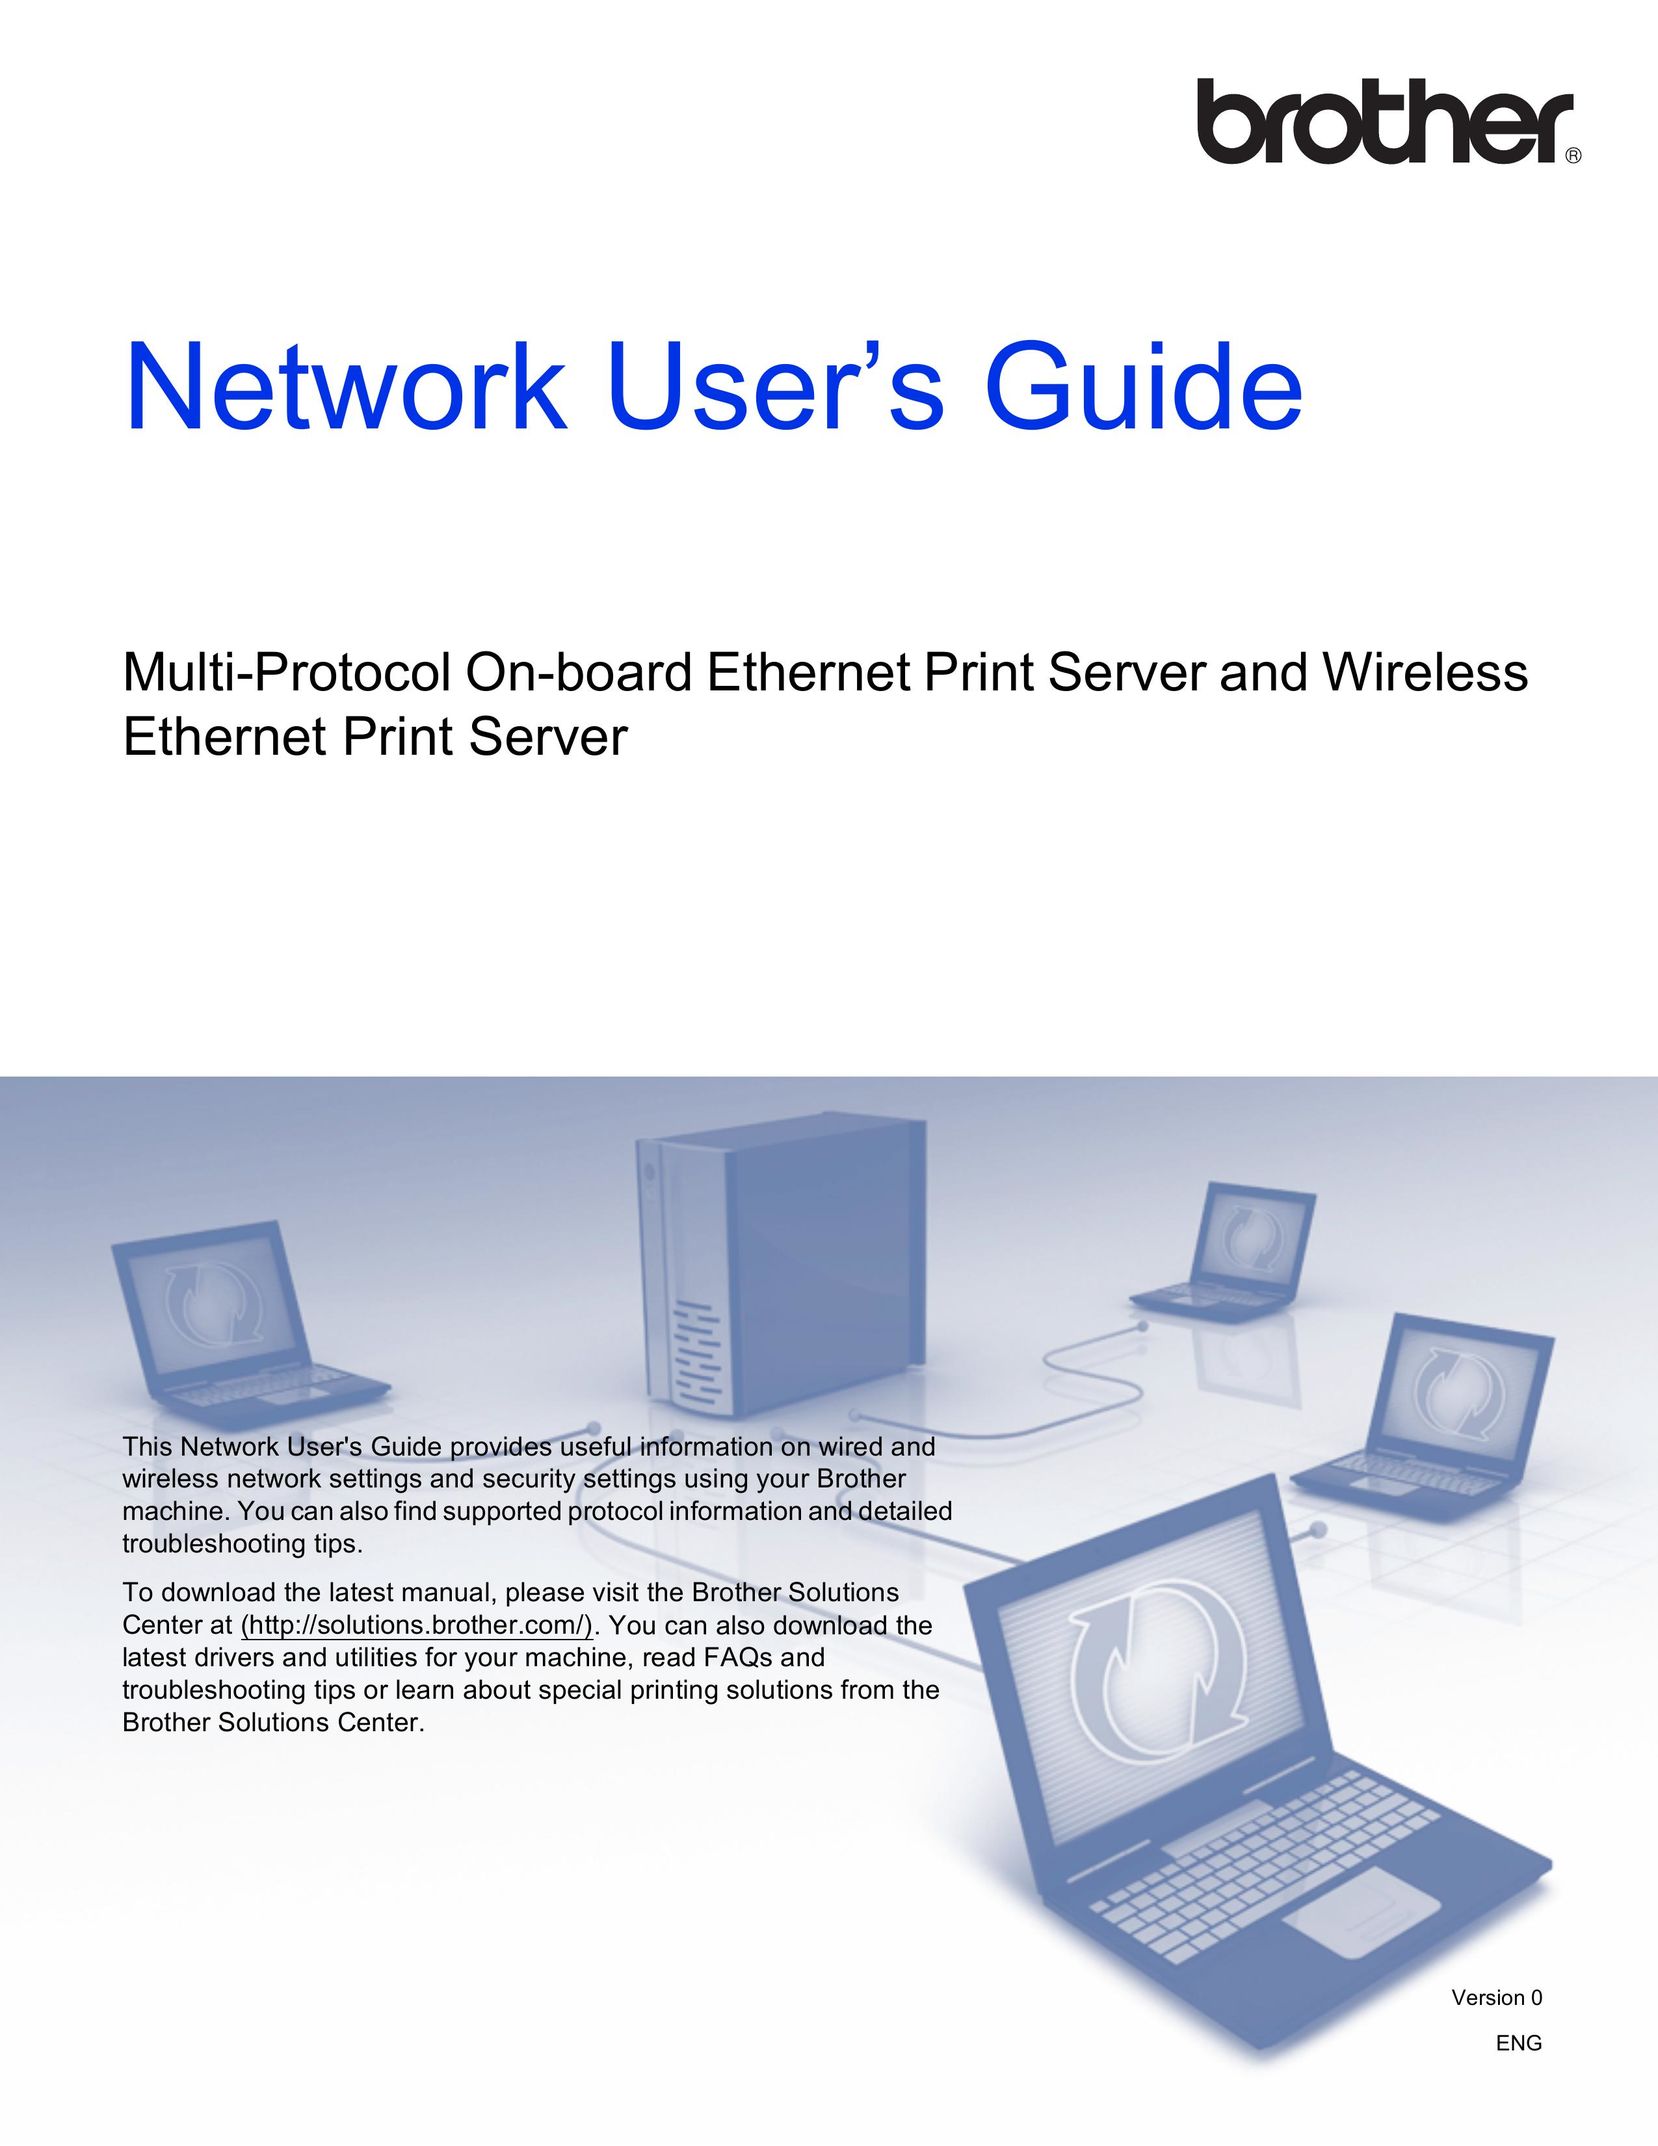 Brother Multi-Protocol On-board Ethernet Print Server and Wireless Ethernet Server User Manual